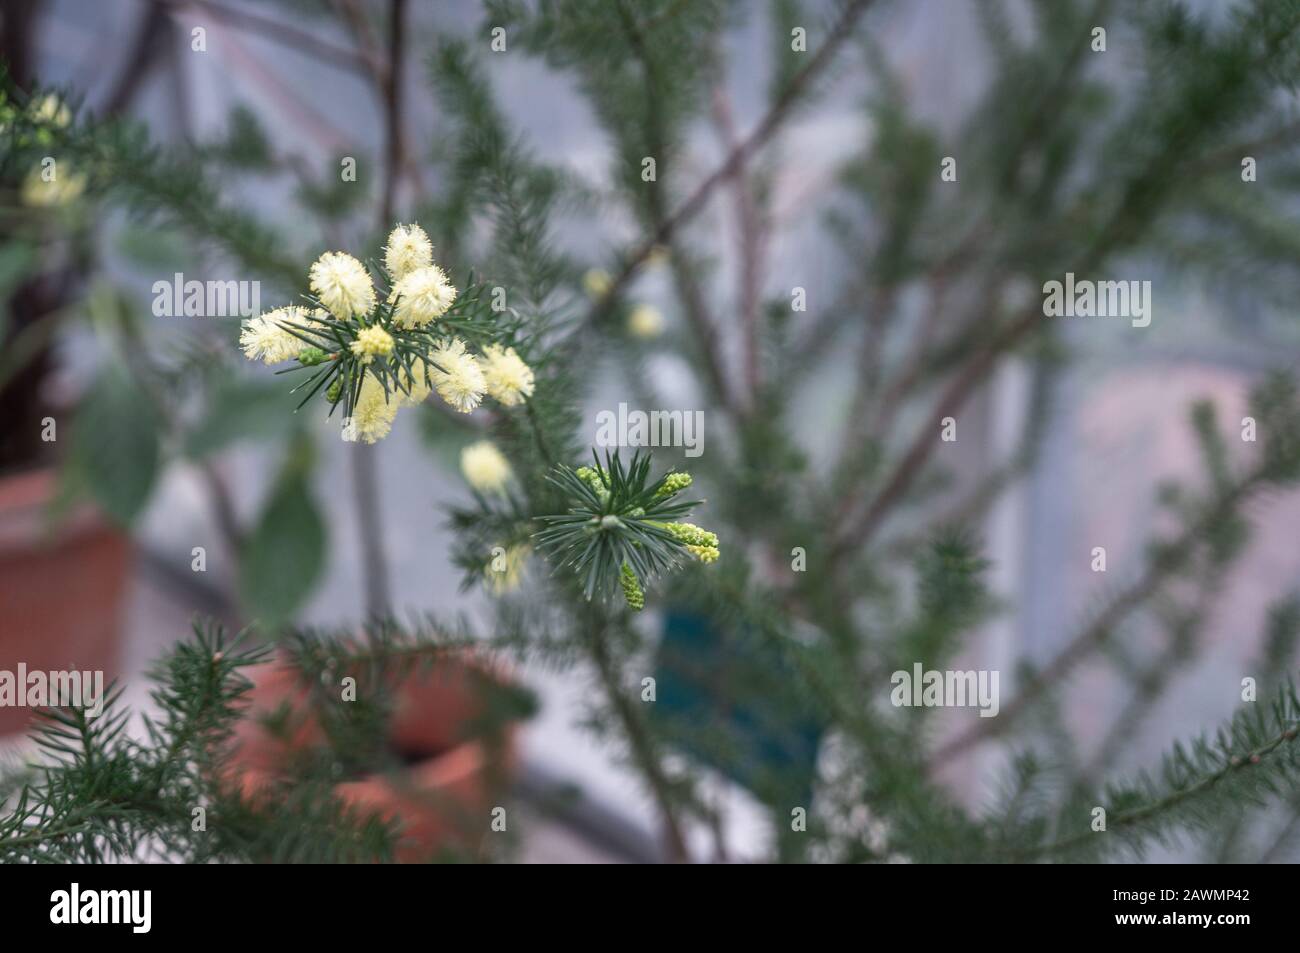 Macro photo of small Australian Bottle Brush flowers in yellow growing on thin fir branches. Shot in natural daylight at indoors greenhouse garden Stock Photo